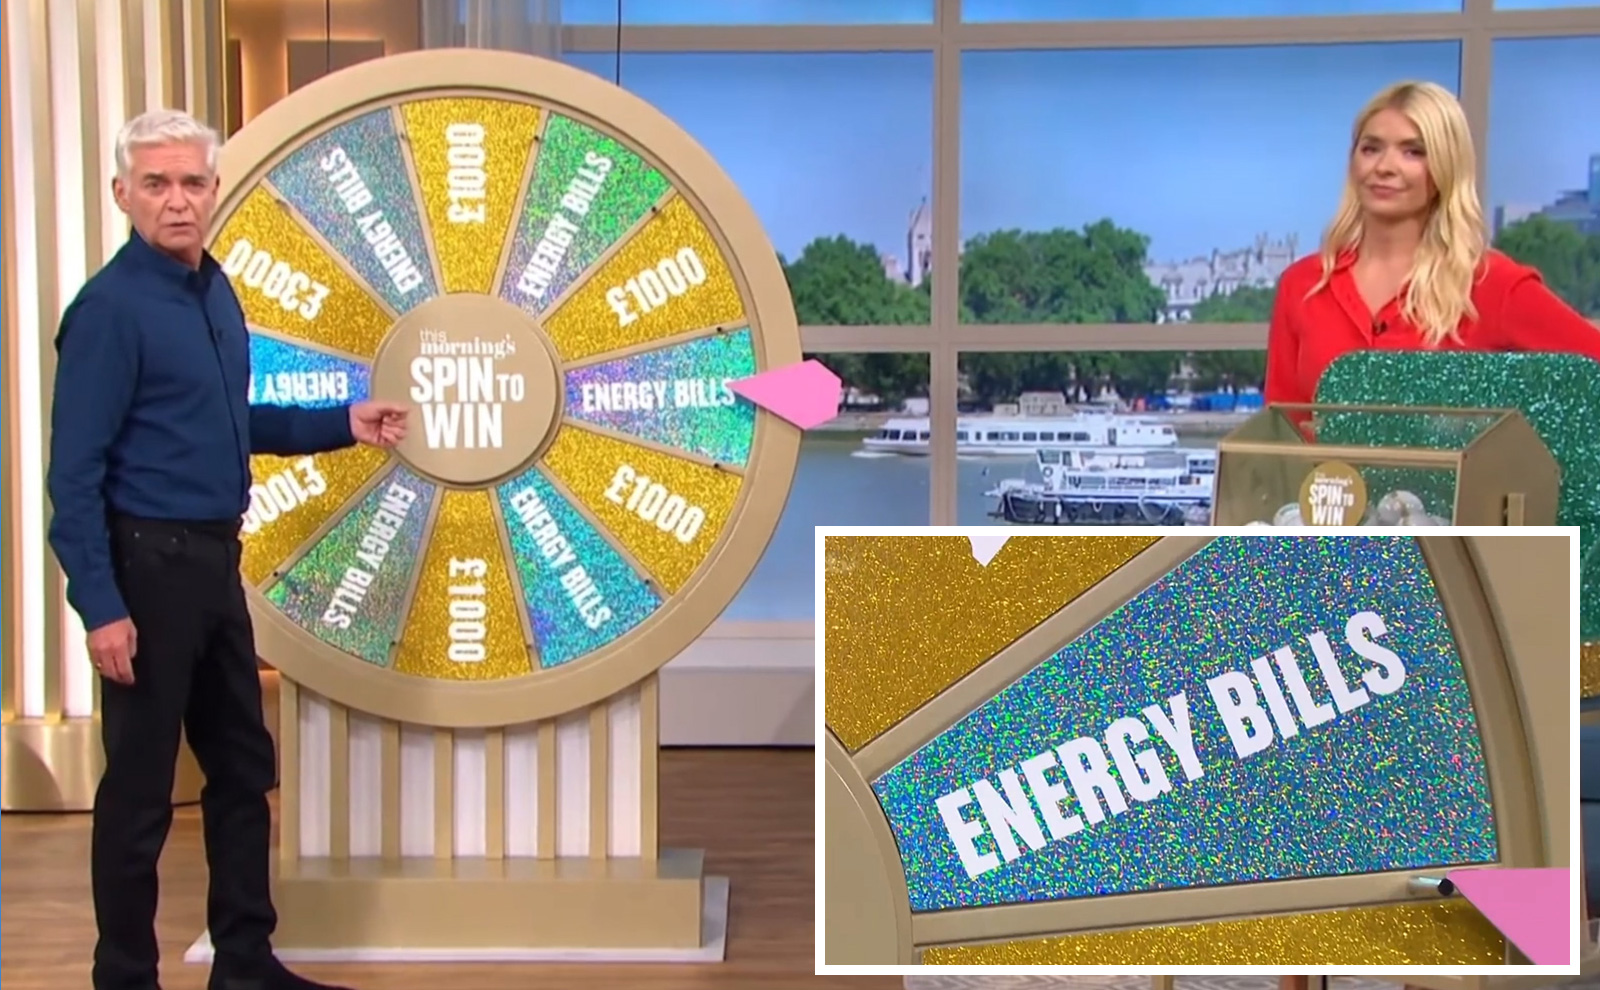 Spin-to-Win TV Game With Prizes Paying Energy Bills Branded 'Dystopian'